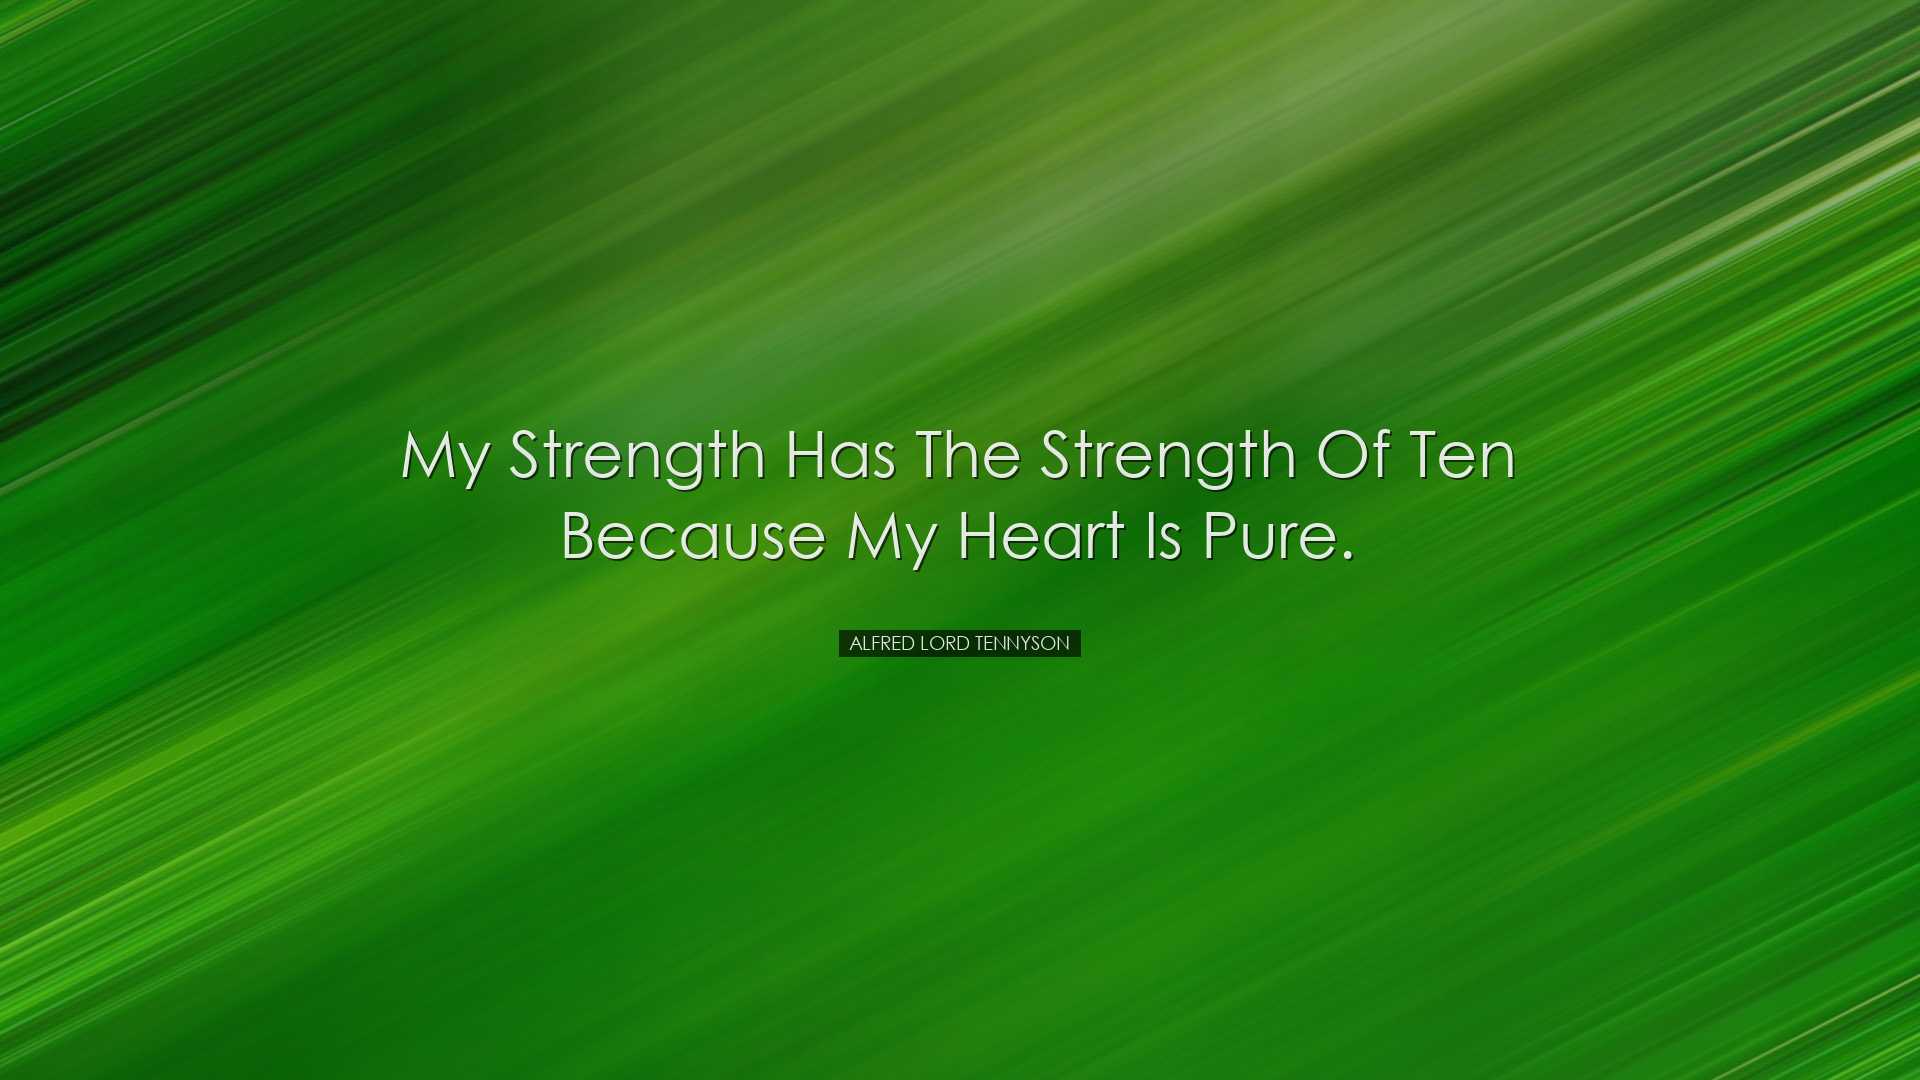 My strength has the strength of ten because my heart is pure. - Al